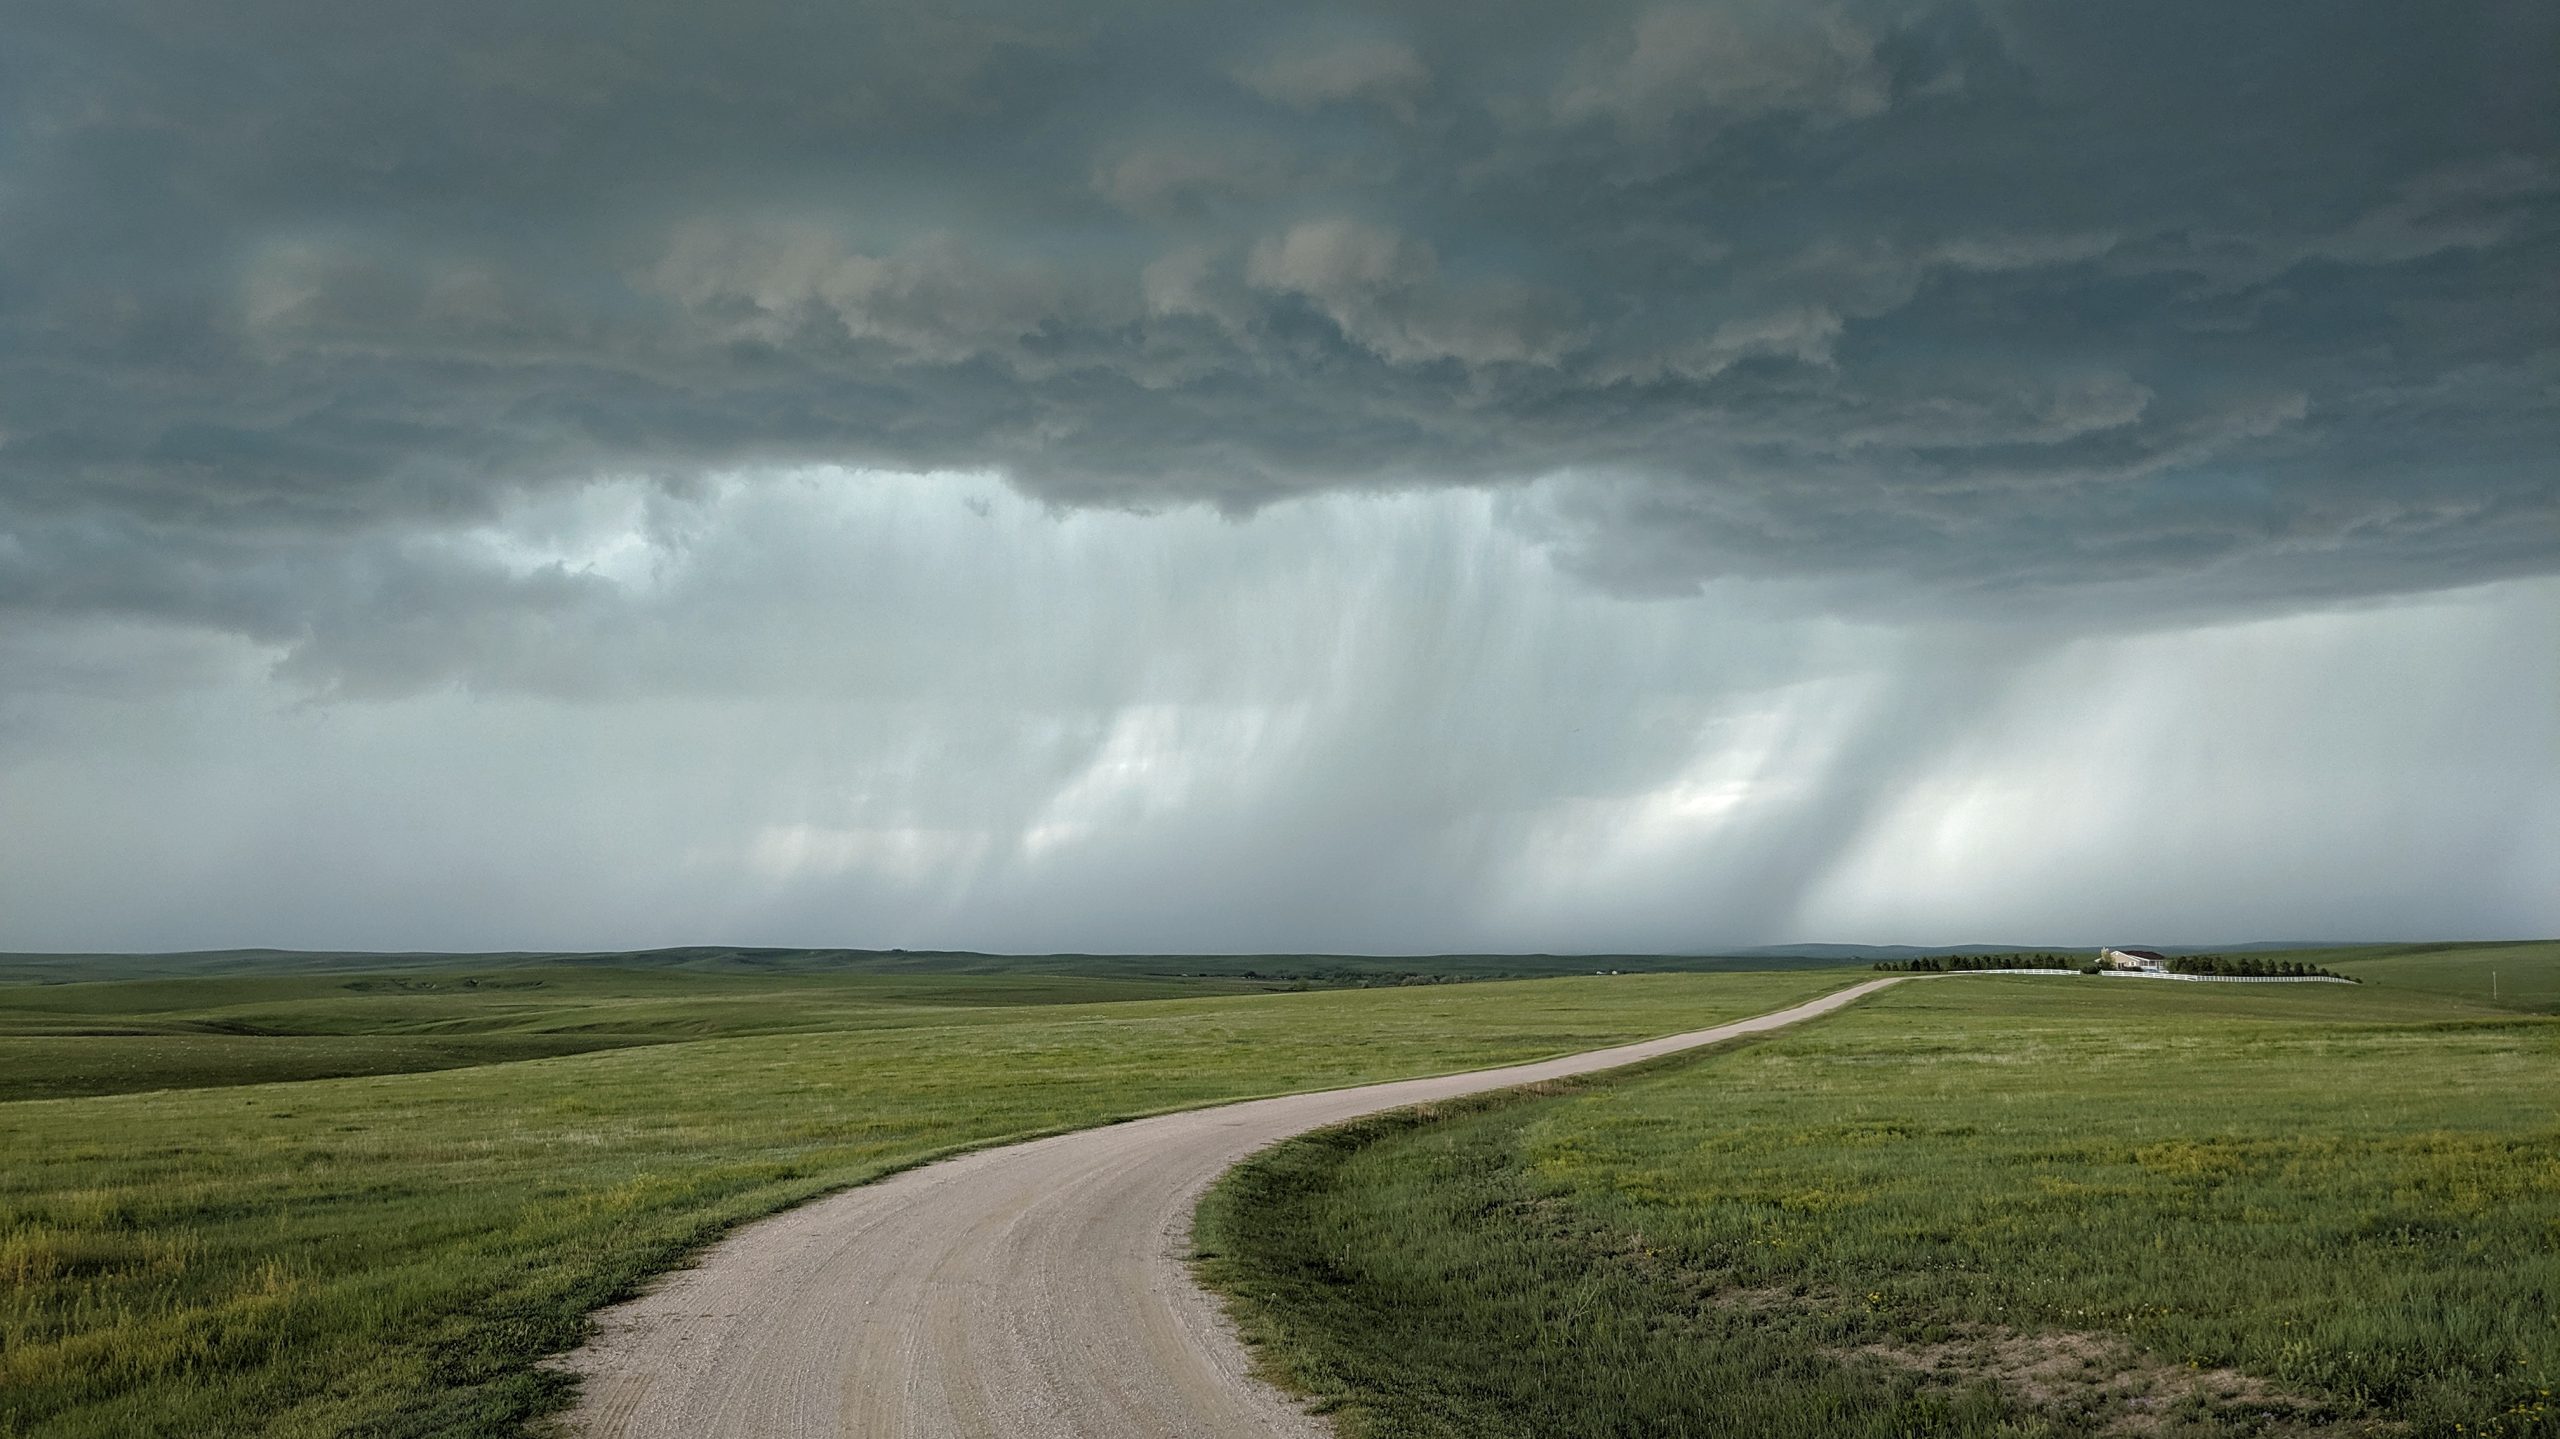 A photograph of a springtime thunderstorm and rain curtain over a green field with a house at the end of gravel road.